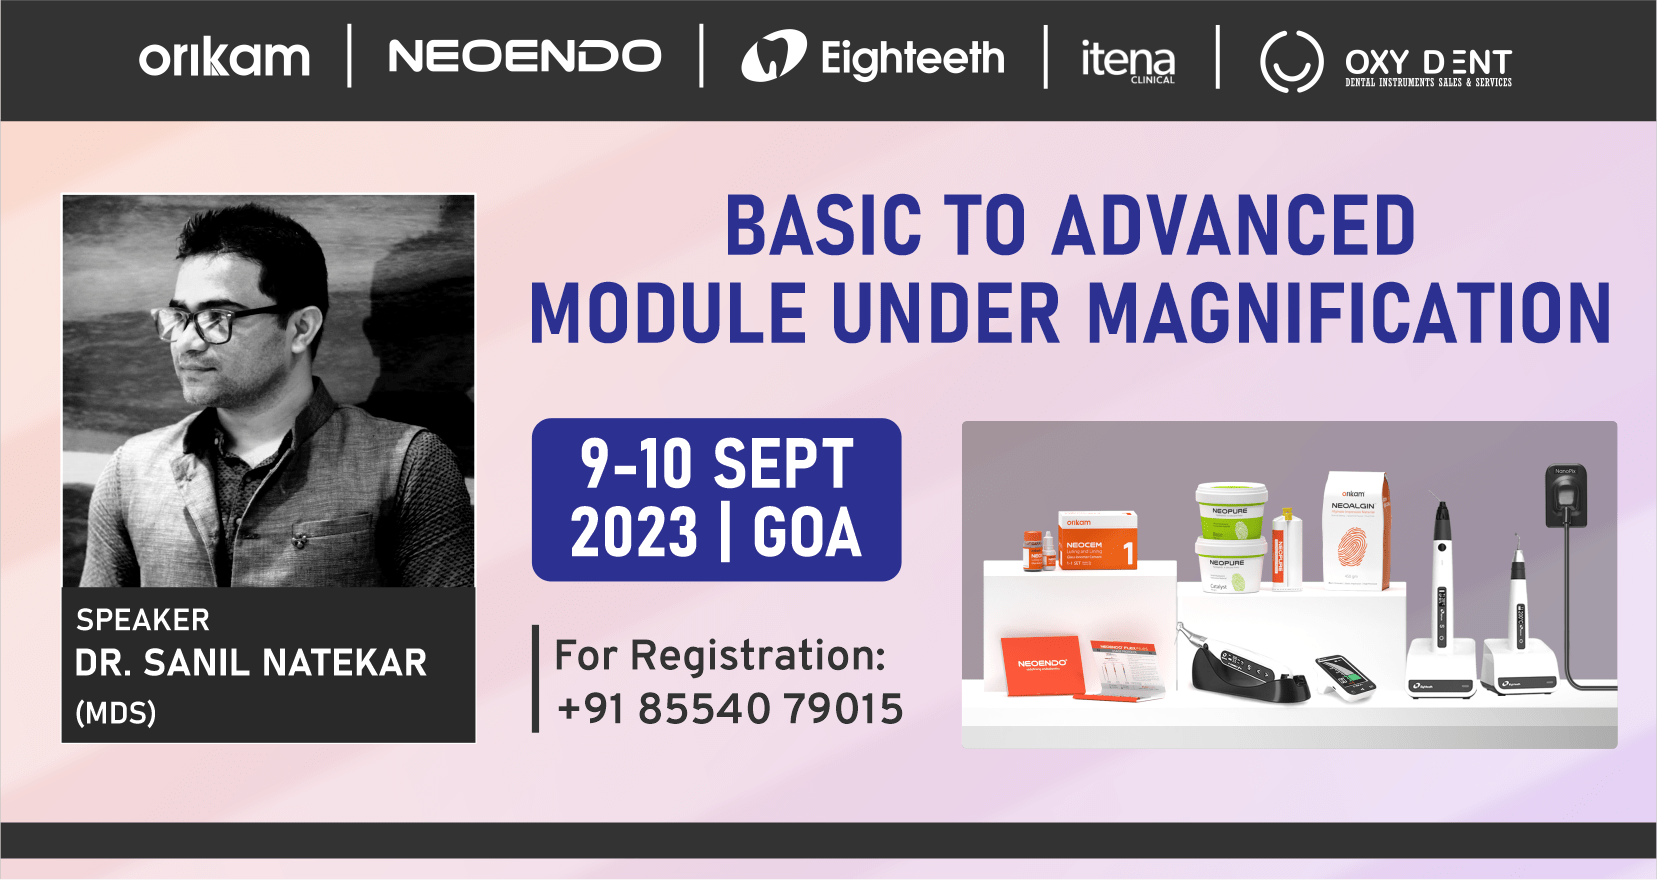 "Basic to Advanced Module Under Magnification"